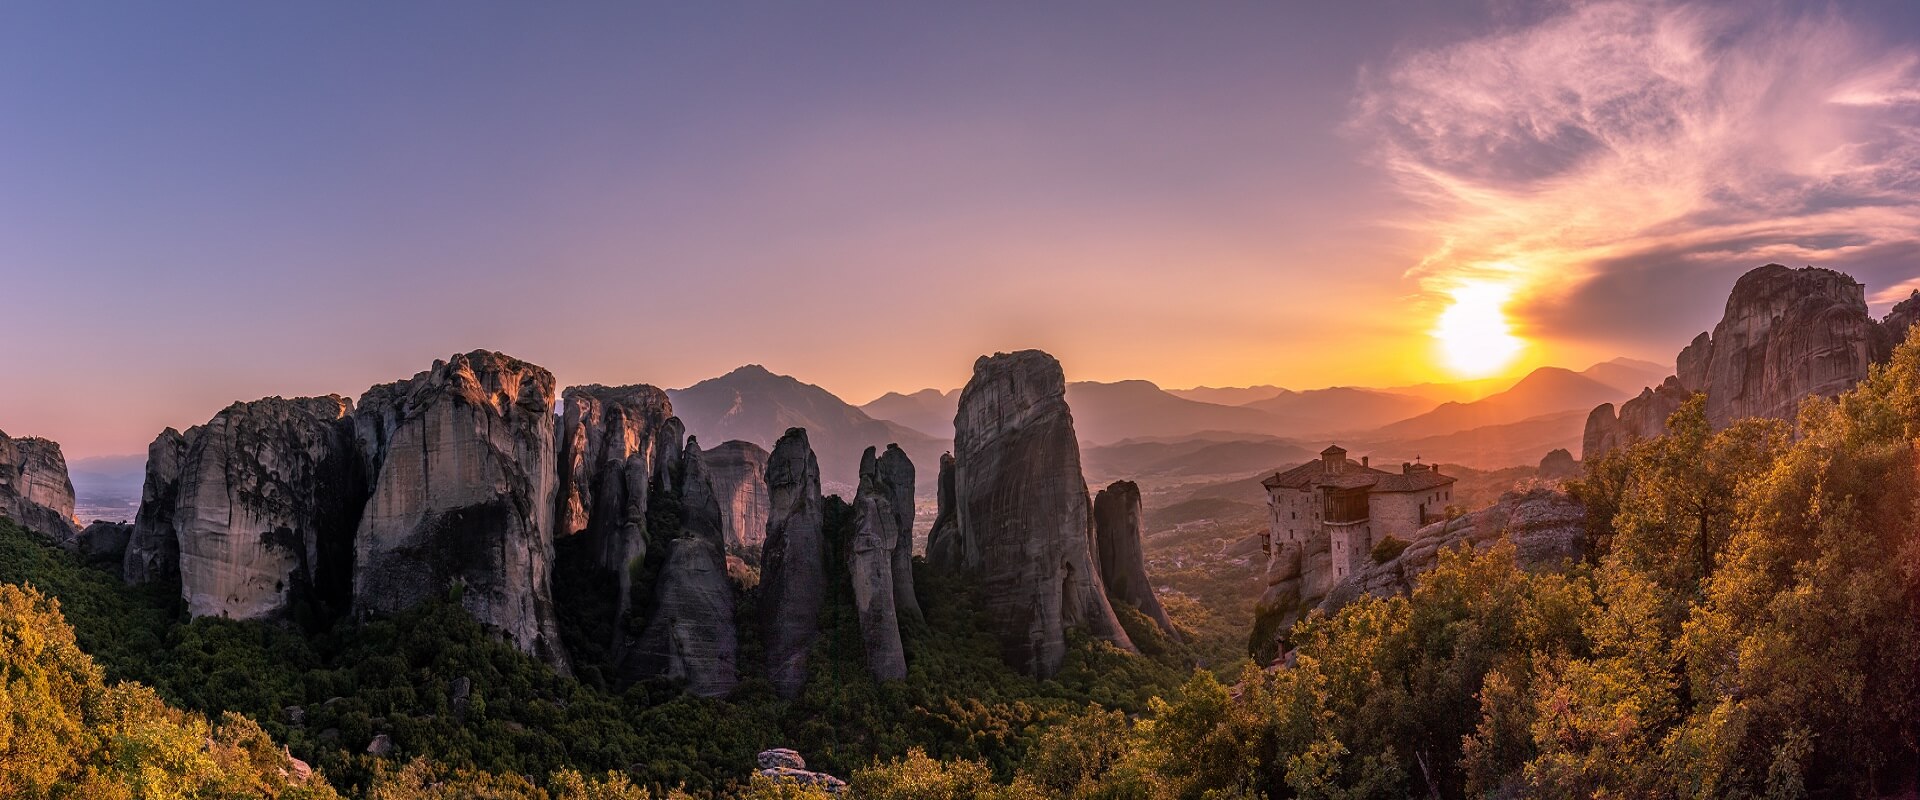 EASTER IN THE SHADOW OF METEORA